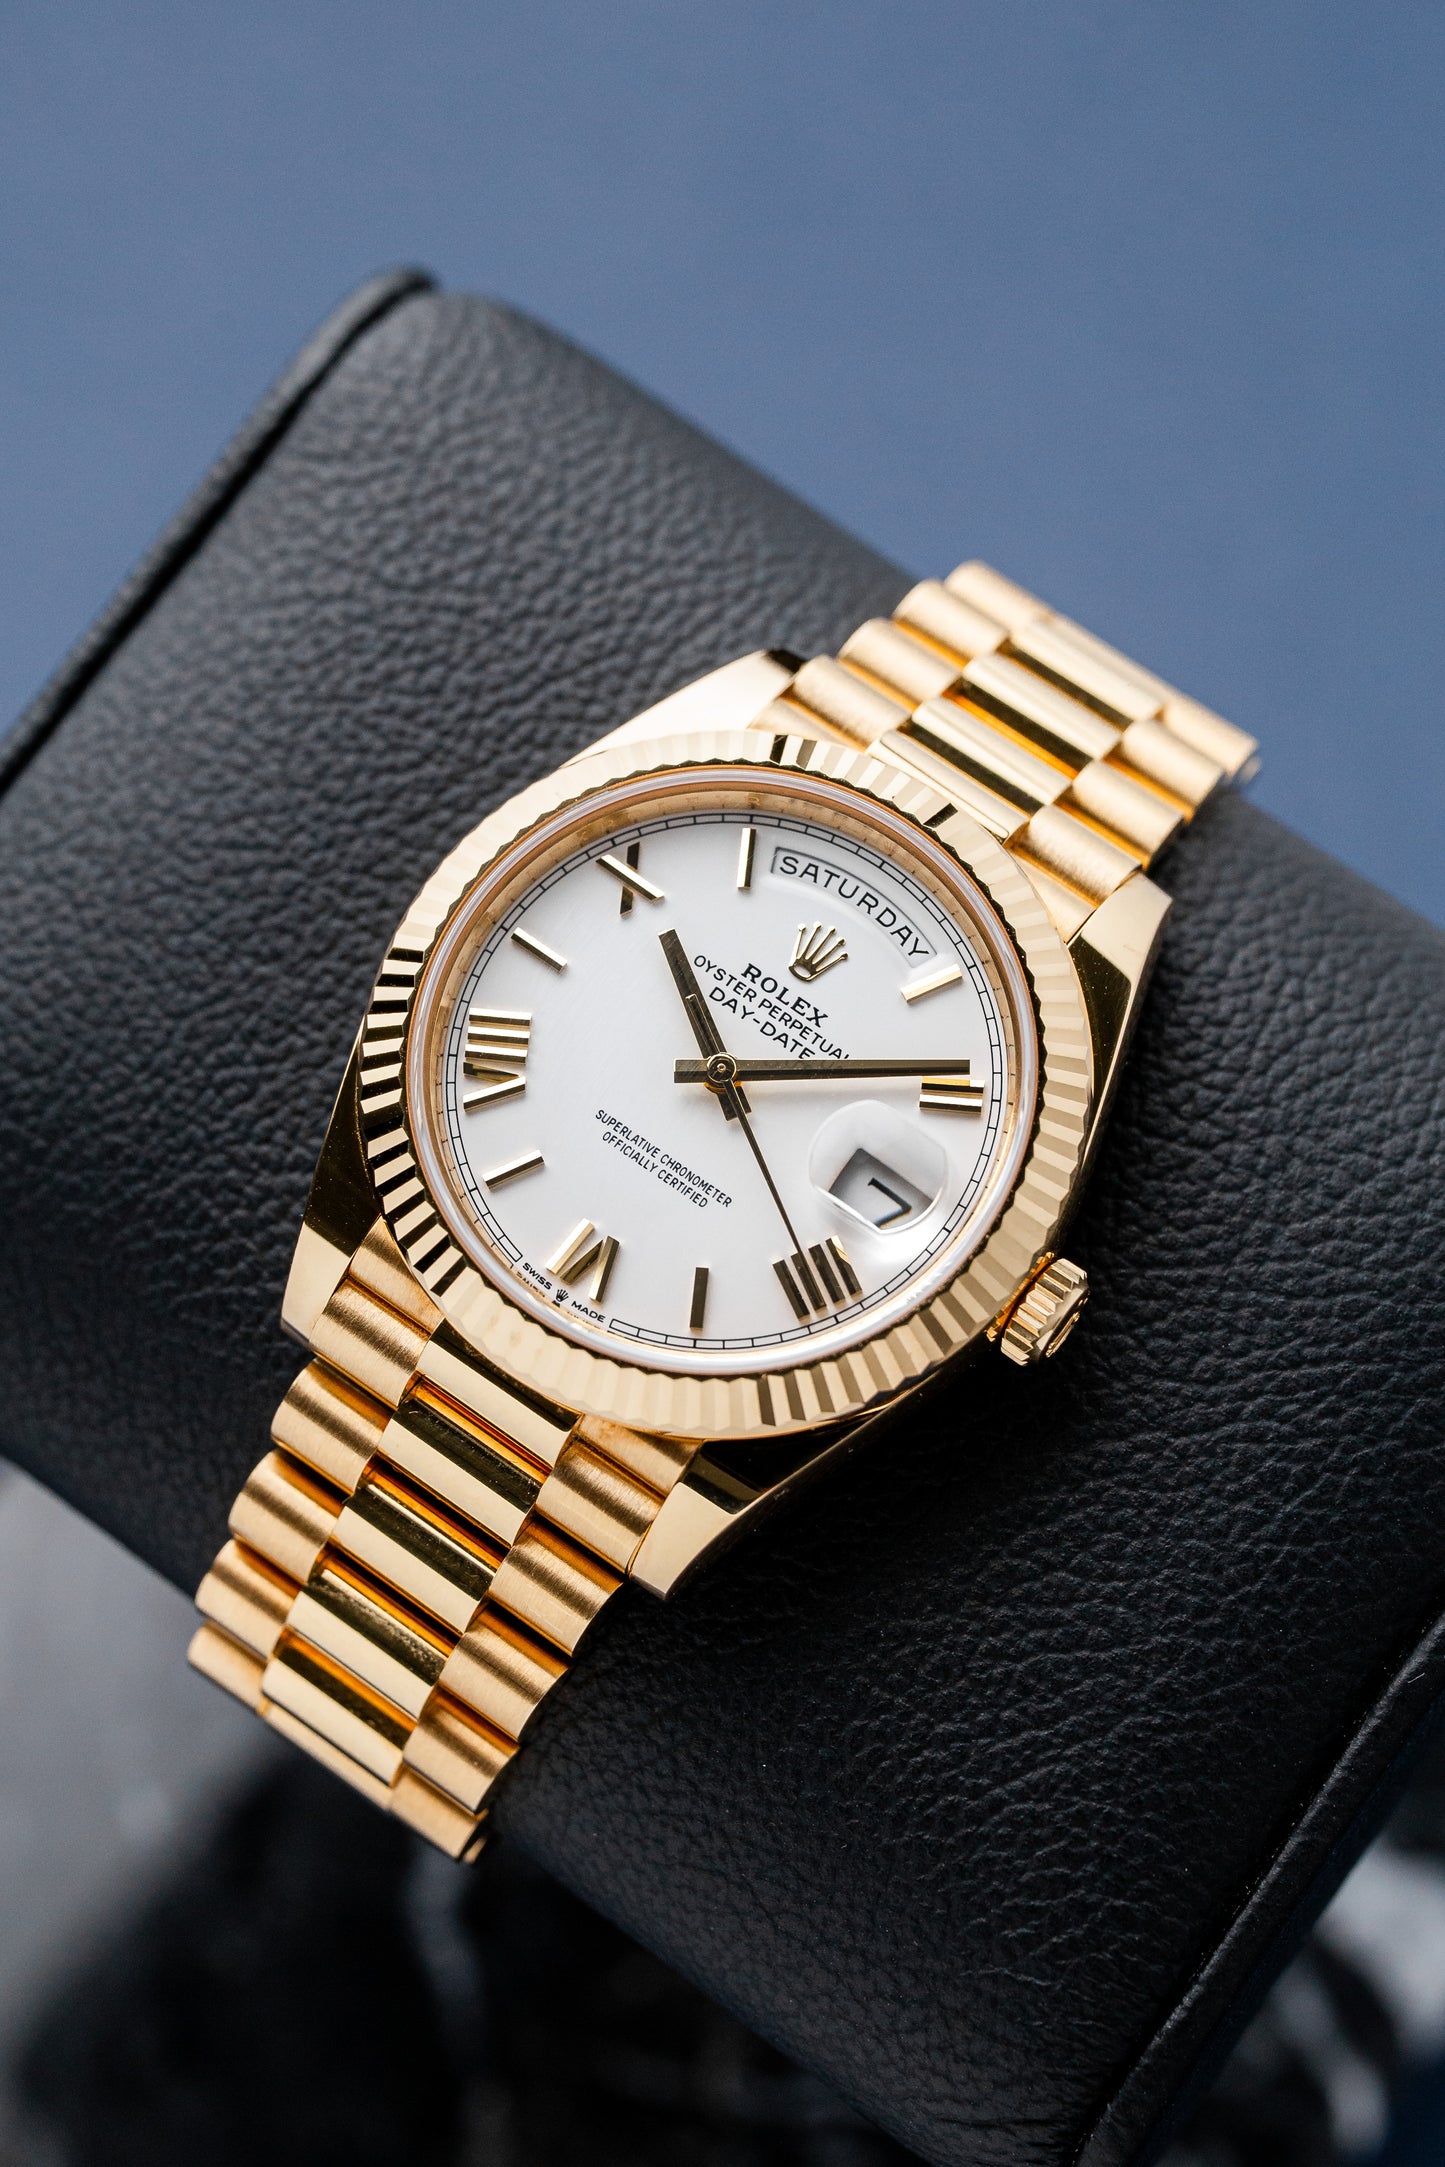 ROLEX DAY-DATE 40 PRESIDENT "WHITE DIAL" REF: 228238